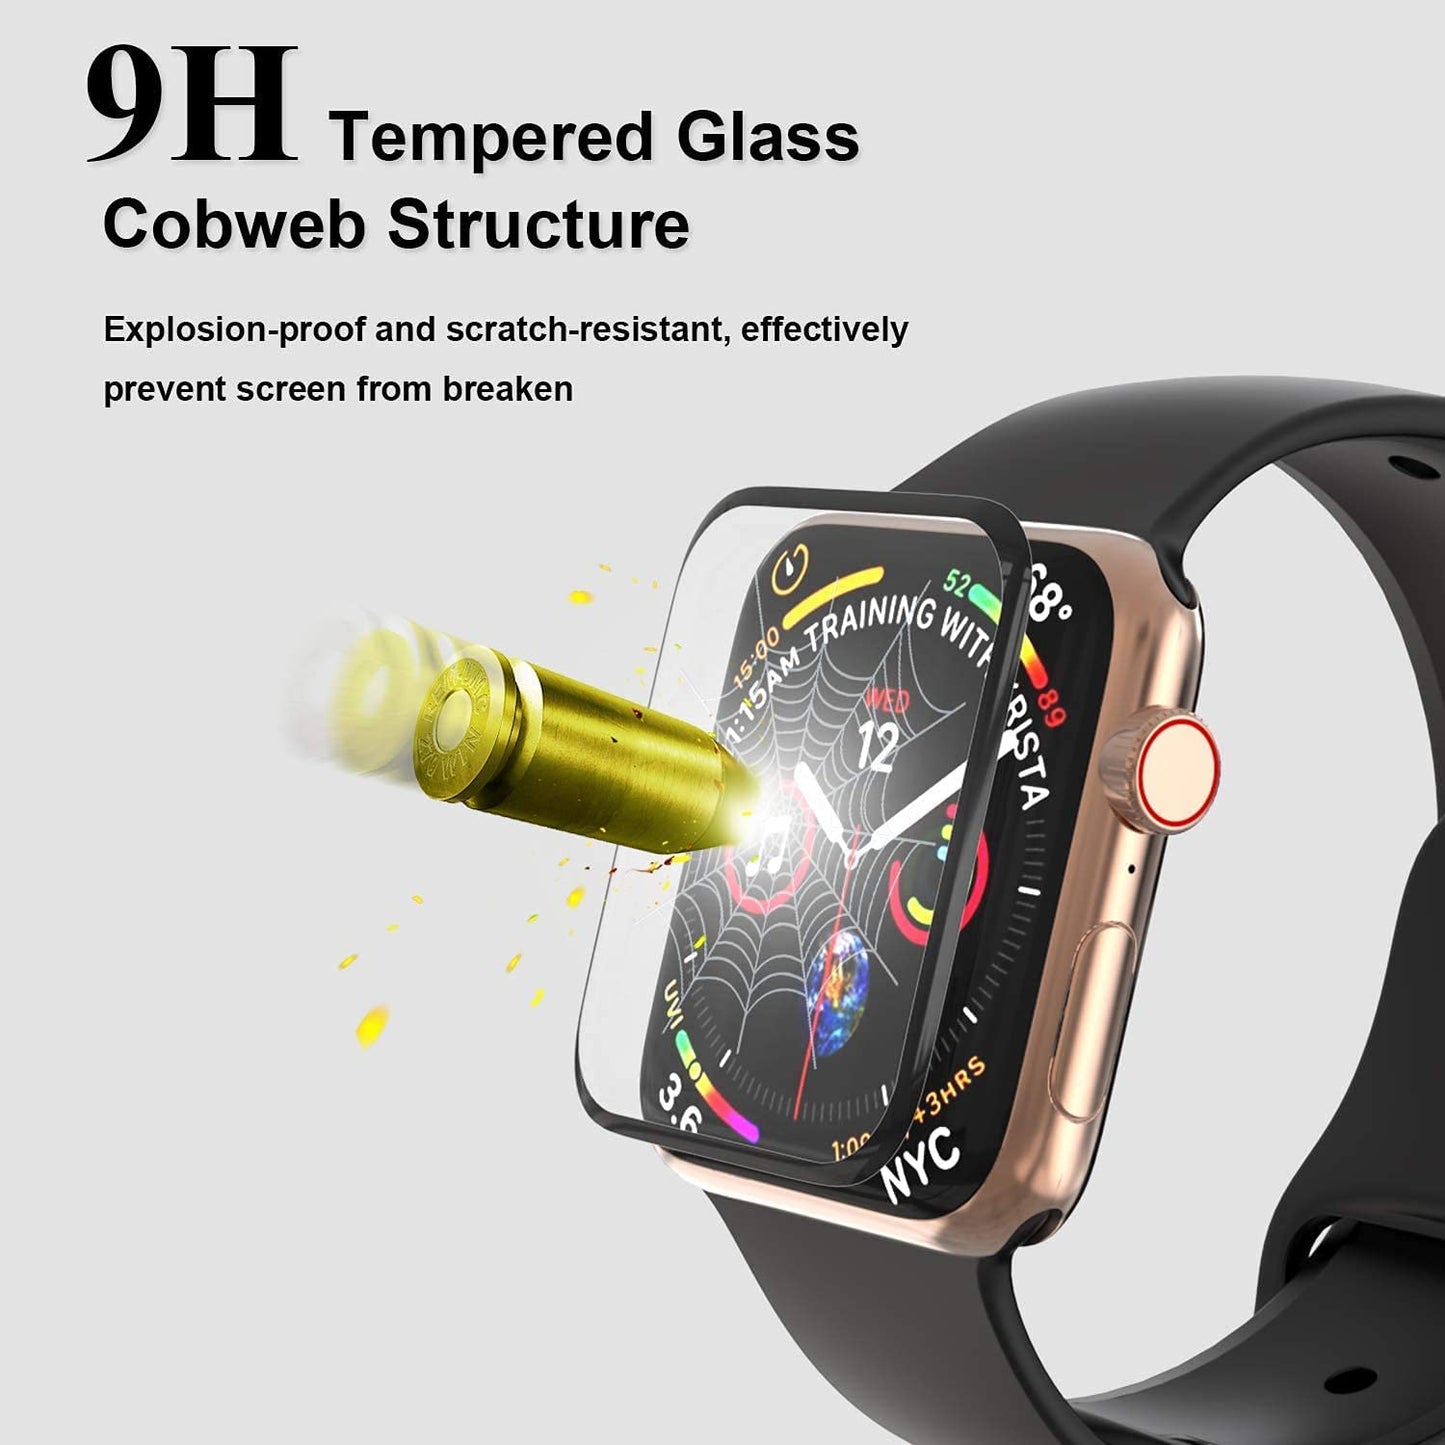 2-Pack Tempered Glass Screen Protectors for Apple Watch Series 6/SE/5/4 44mm - Full Coverage, Easy Installation Frame, Waterproof, Bubble-Free, HD Clear Film for iWatch 44mm